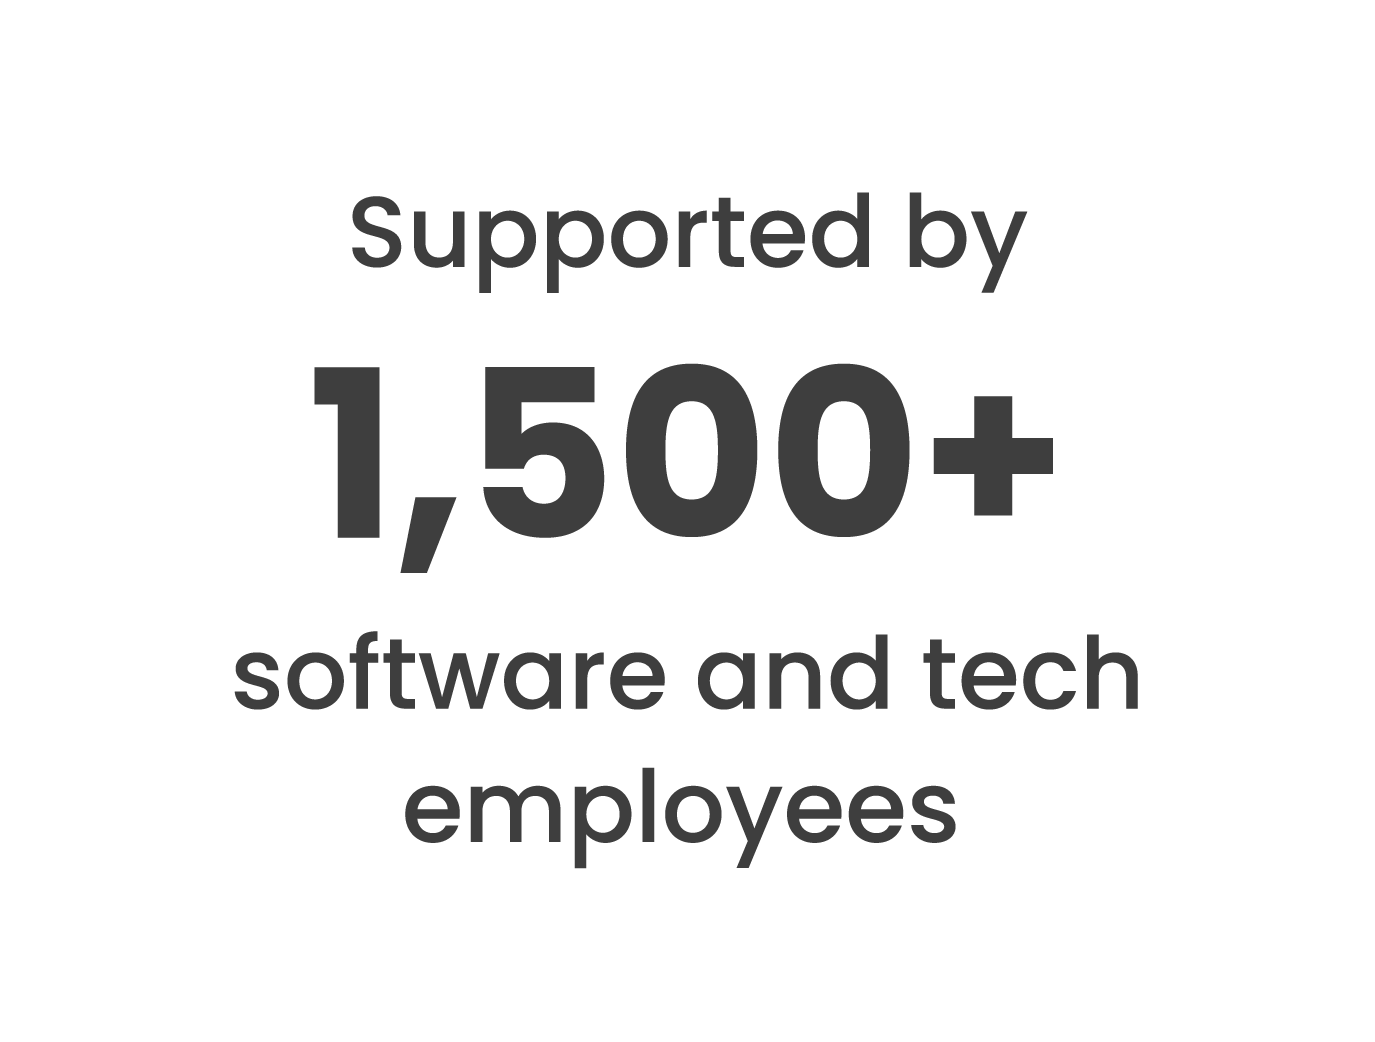 Supported by more than 1,500 software and tech employees